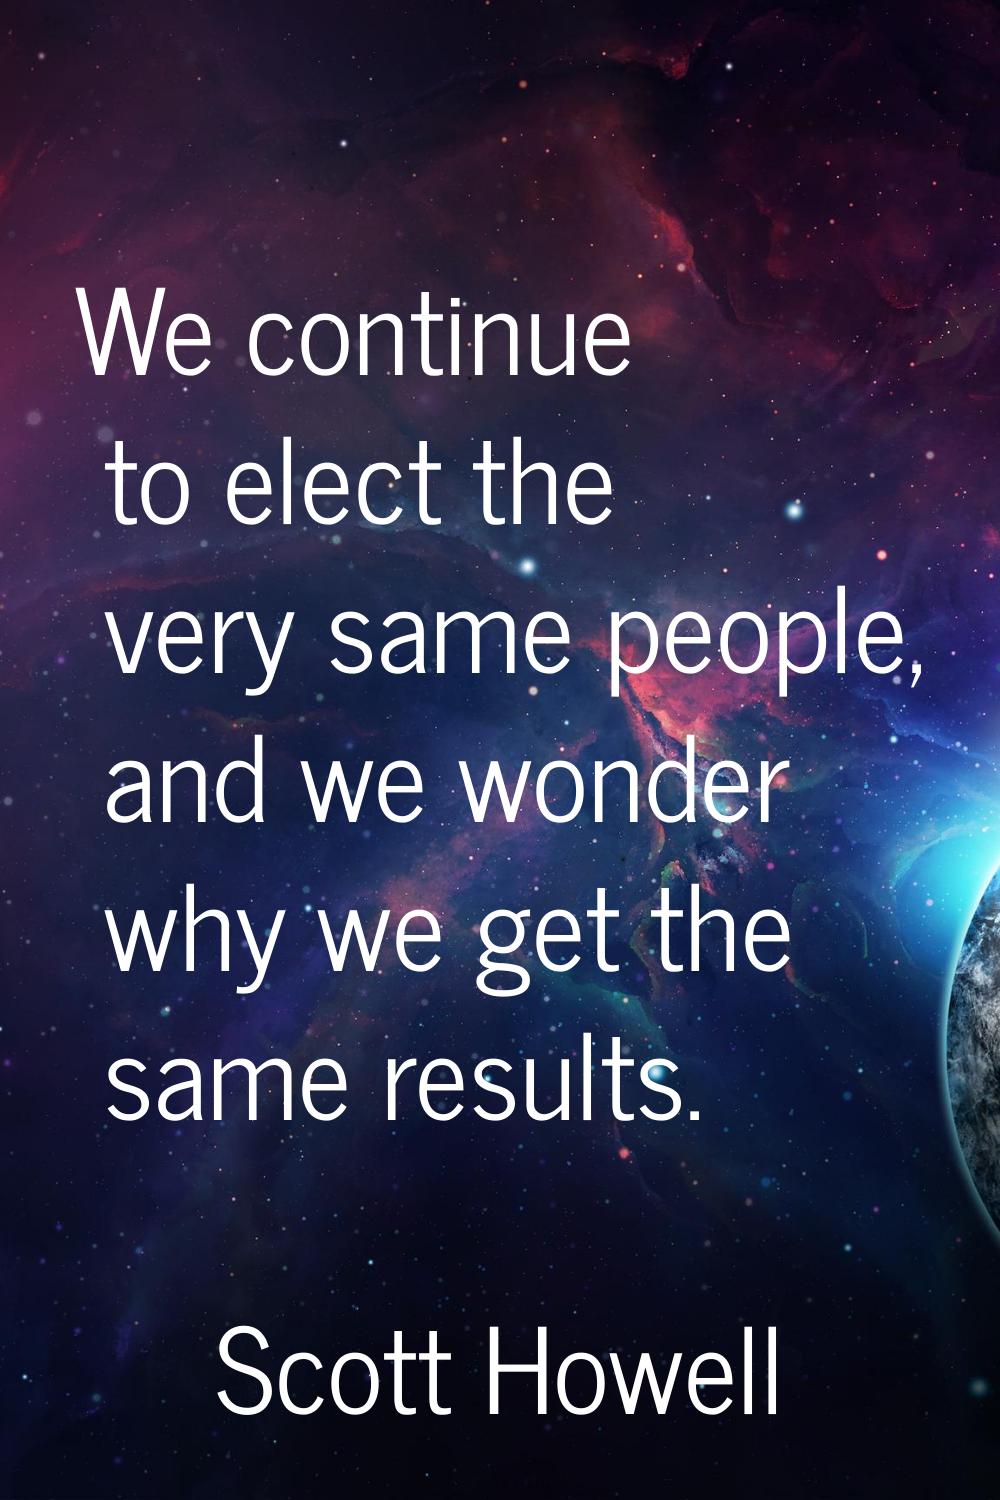 We continue to elect the very same people, and we wonder why we get the same results.